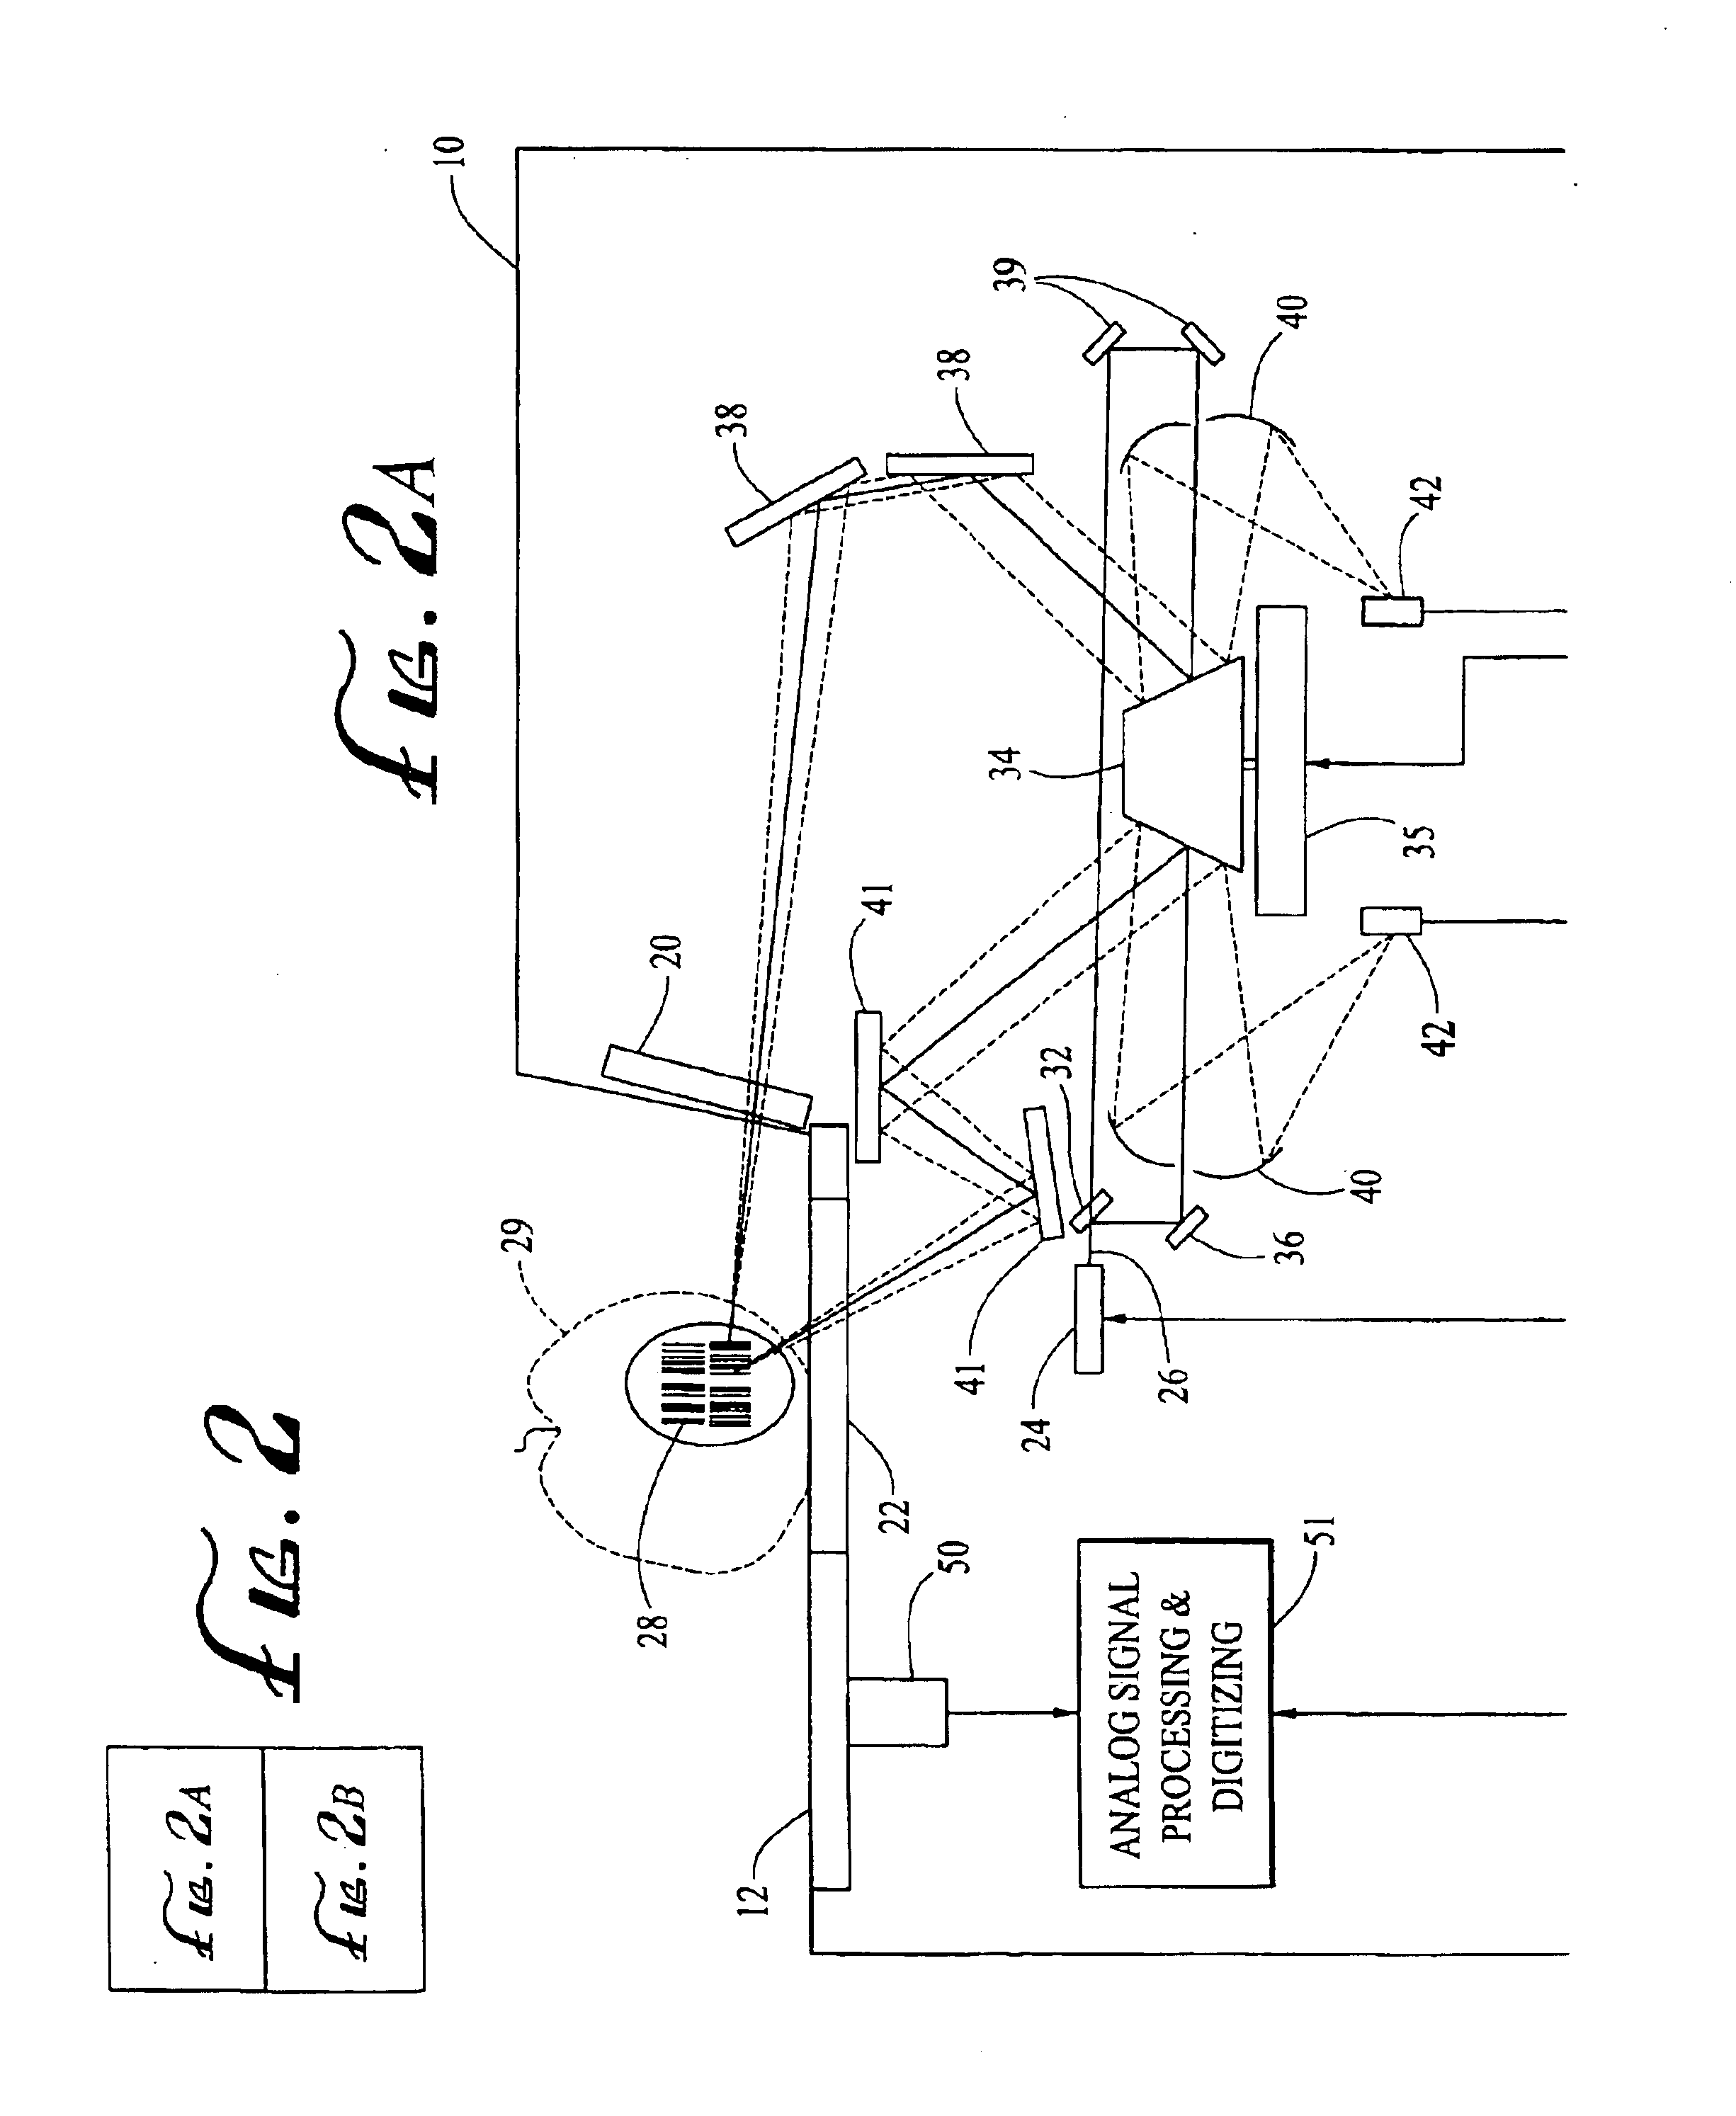 Method and apparatus to prevent reporting multiple reads of optical coded items